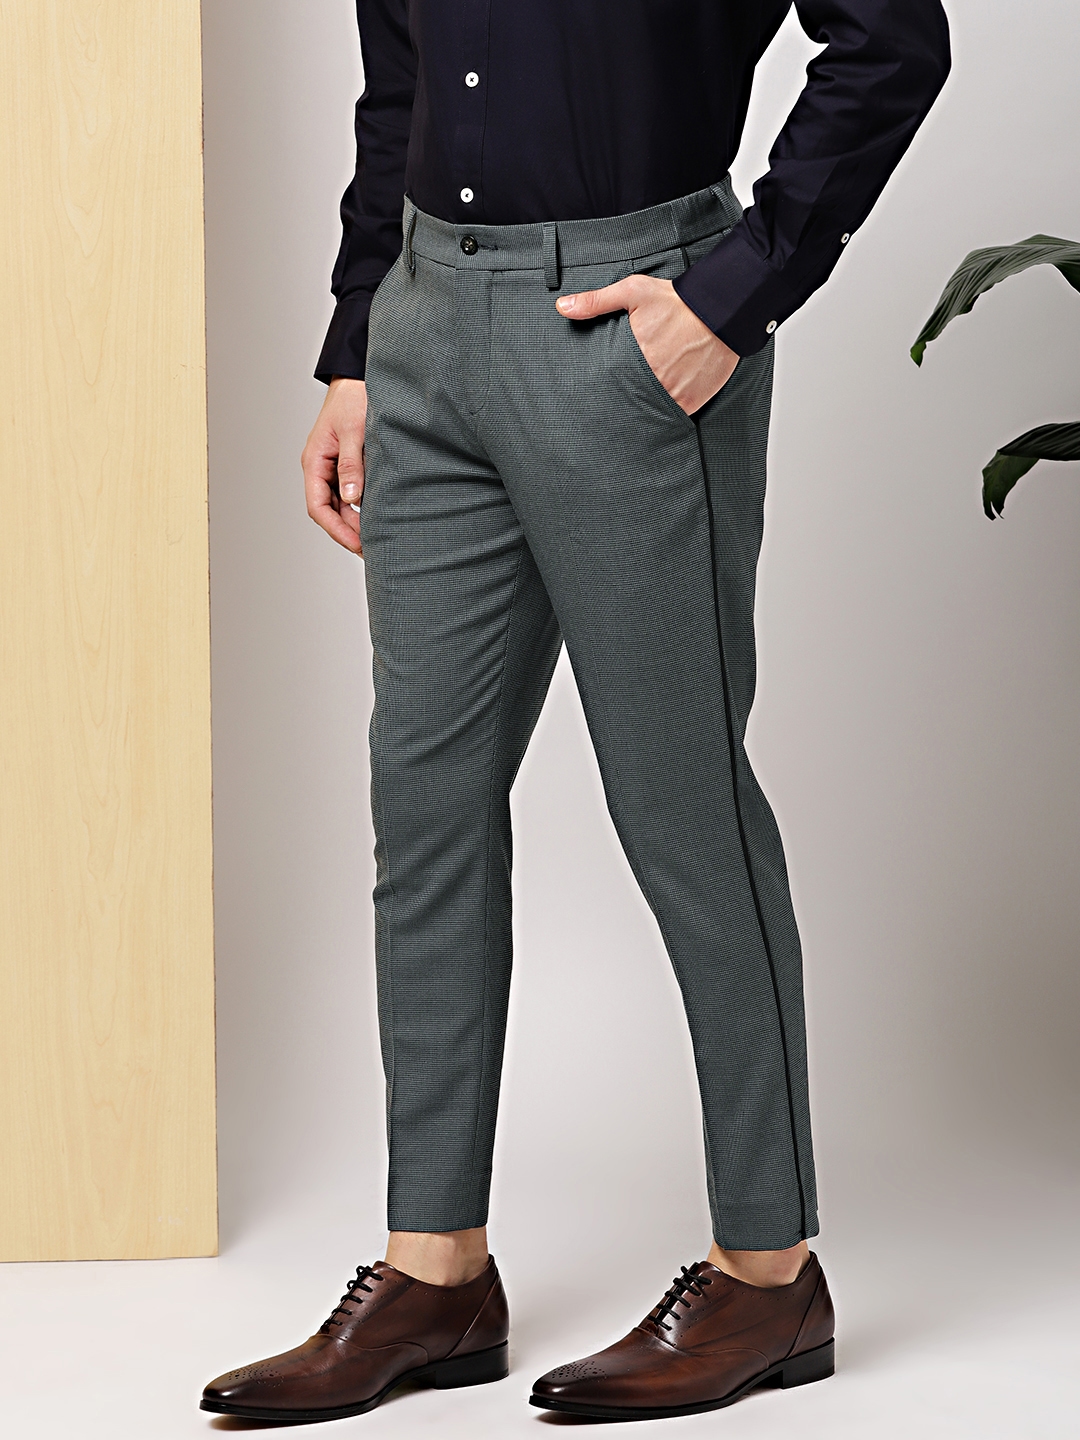 Latest Stylish Trousers Designs For Girls 2019Ladies Fashion 